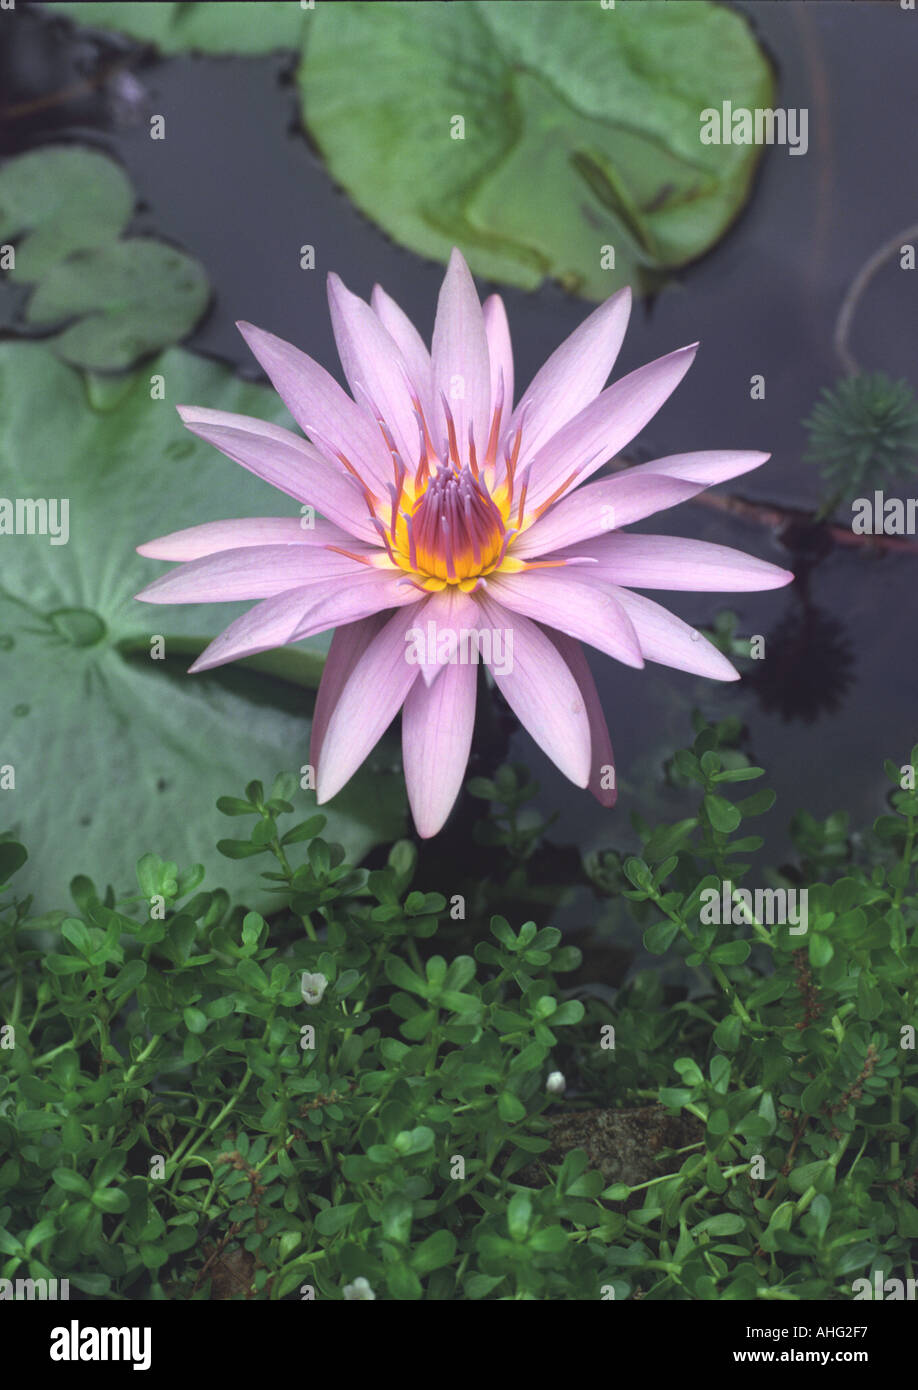 Water Lily In Pond Stock Photo